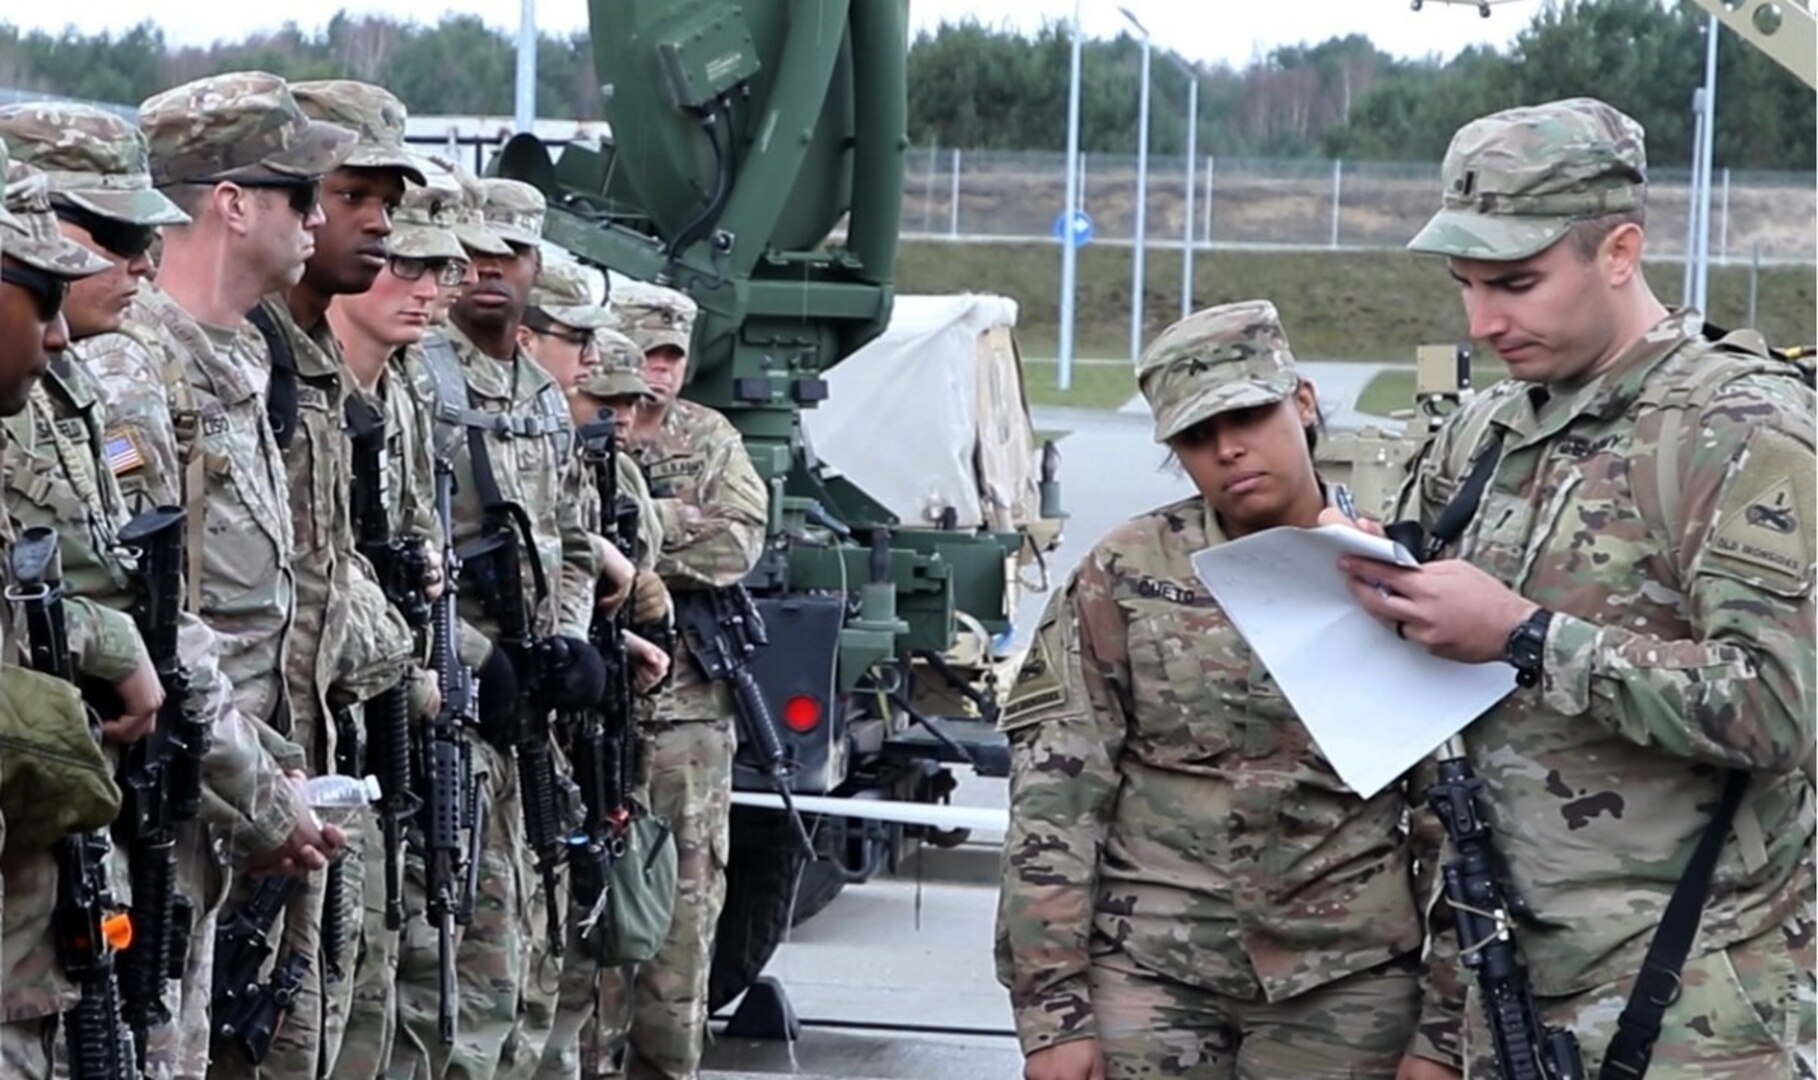 Soldiers with 1st Armored Division's 2nd Armored Brigade Combat Team from Fort Bliss, Texas, check in for roll call after arriving to Drawsko Pomorskie Training Area, Poland, March 19, 2019. The brigade recently conducted a no-notice deployment to Eastern Europe in an effort to test and ensure the rapid capabilities of units deploying to that region.